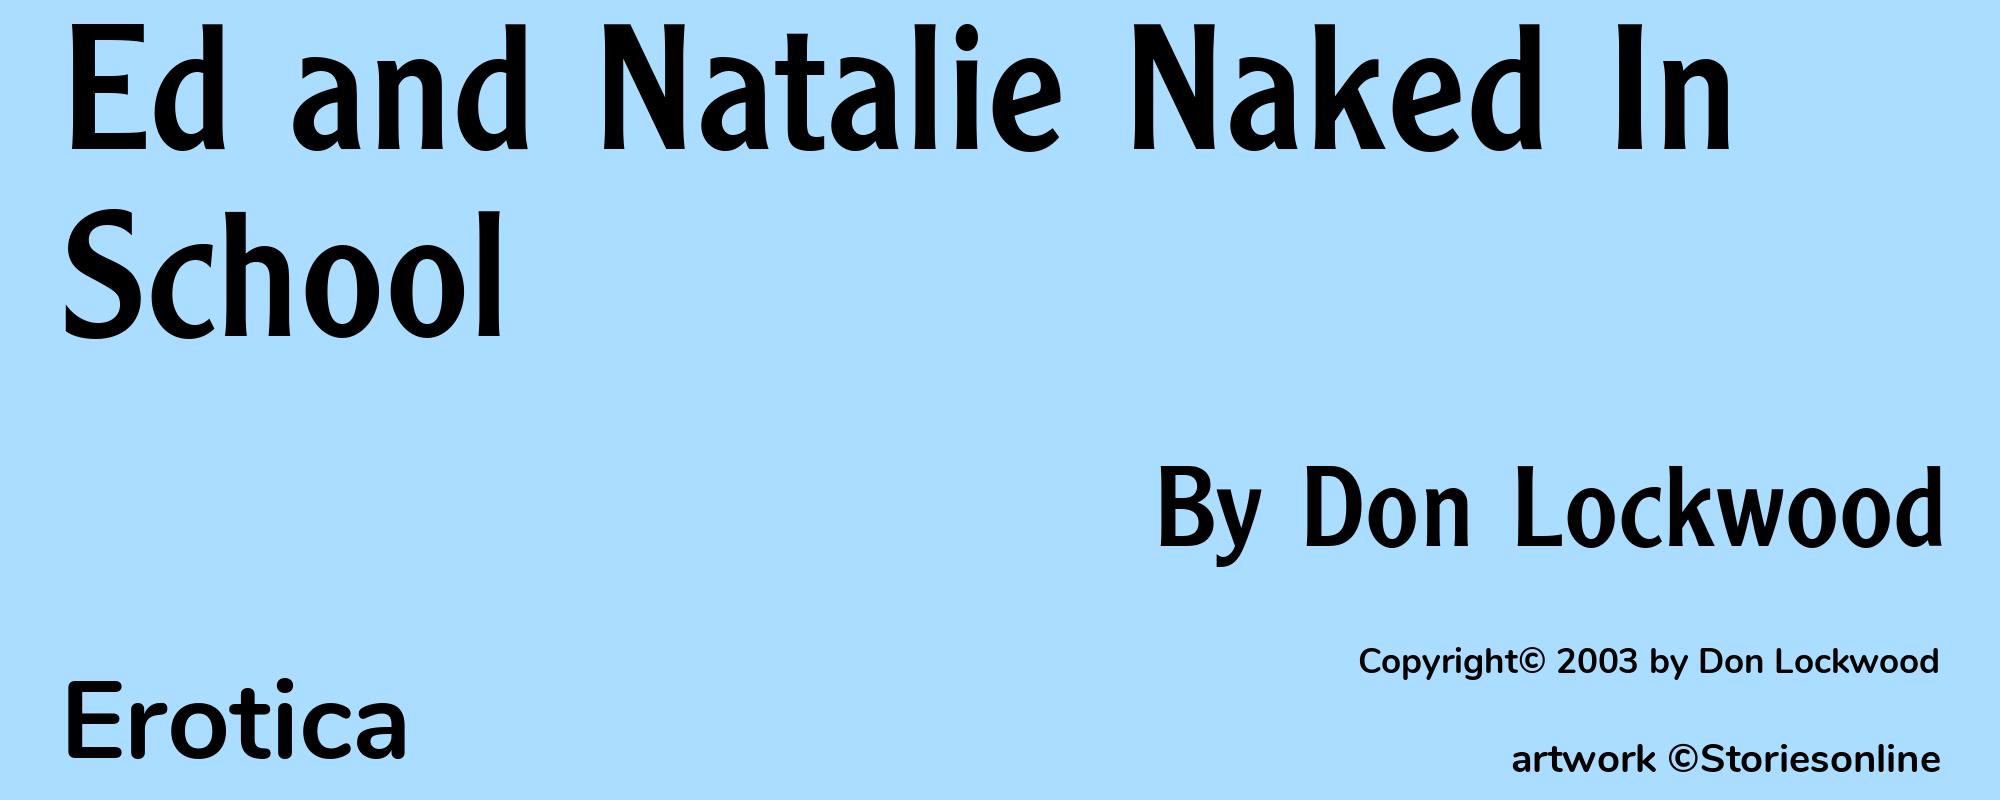 Ed and Natalie Naked In School - Cover